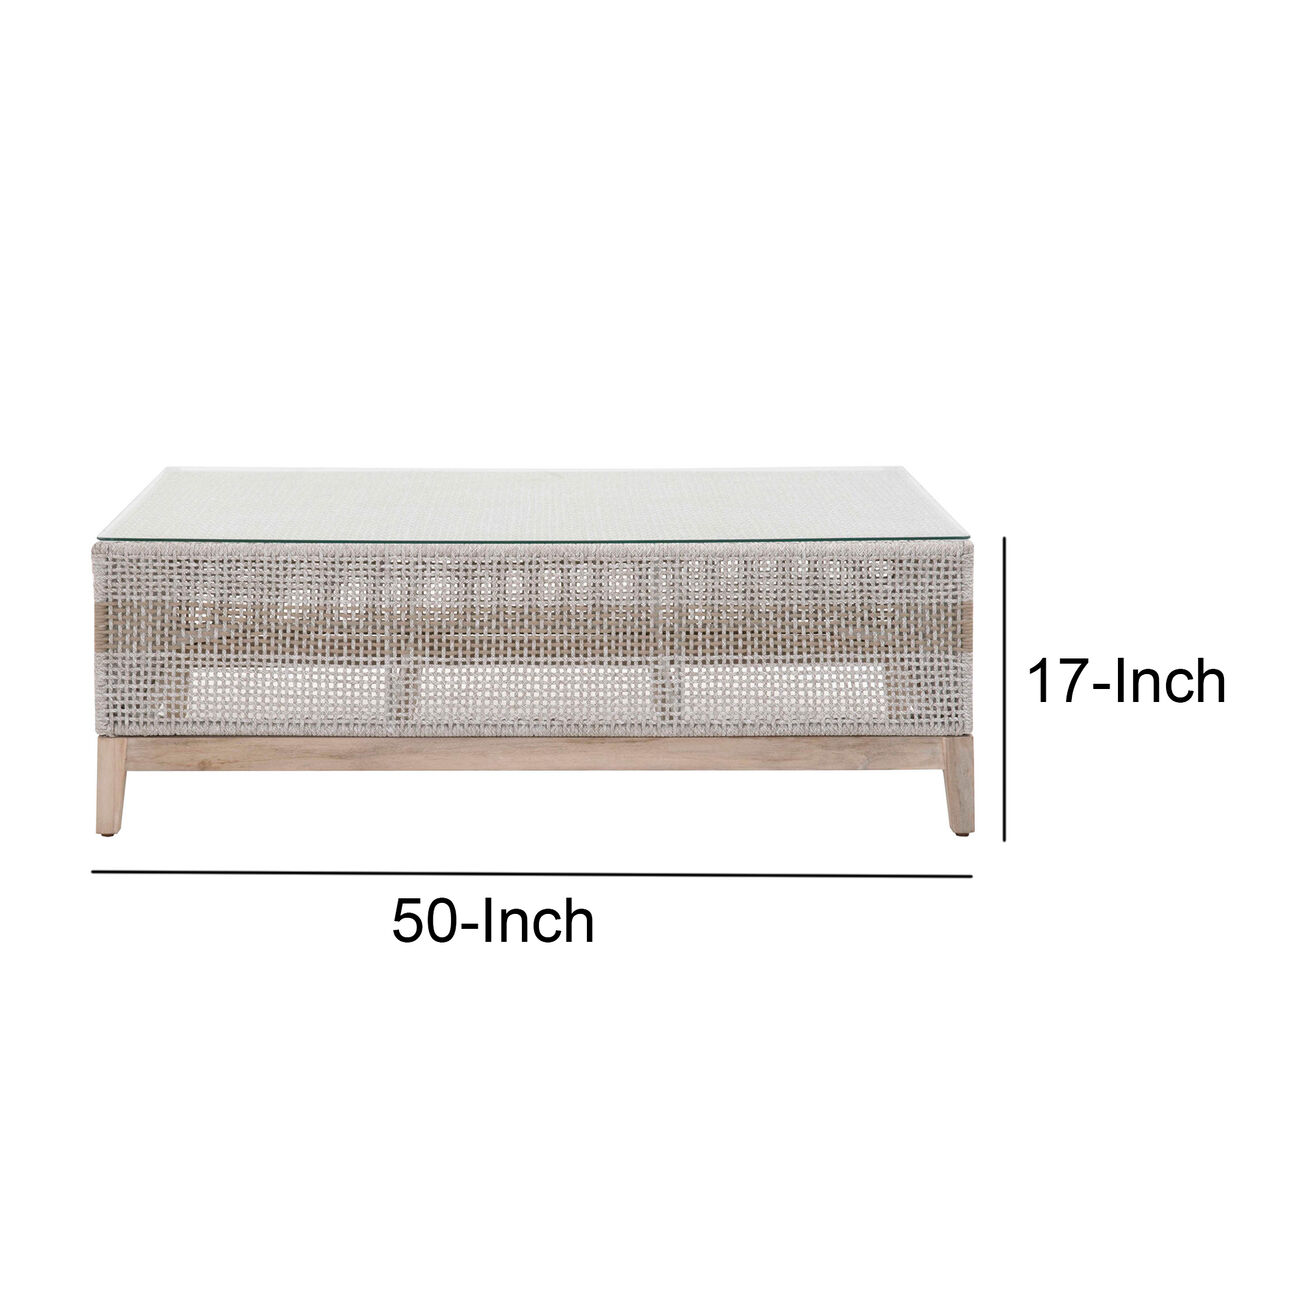 Interwoven Rope Wooden Coffee Table with Glass Top, Gray and Brown